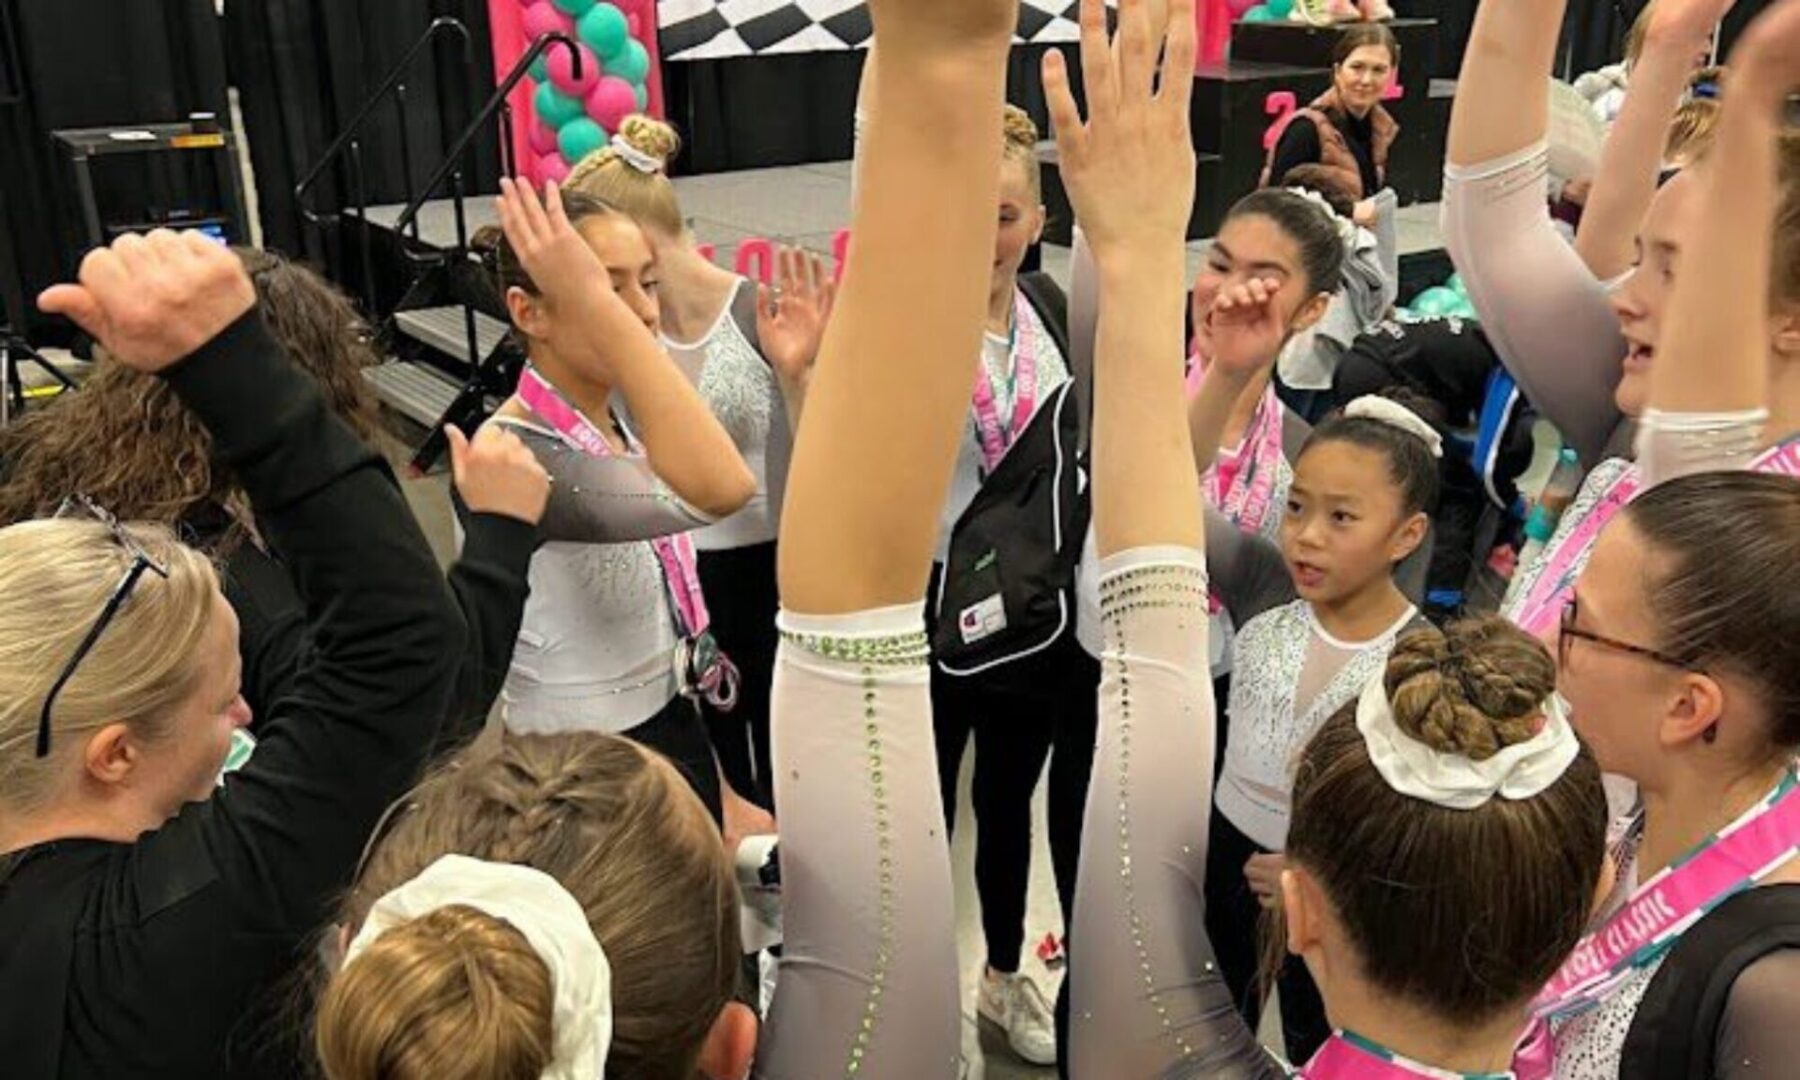 Young gymnasts in leotards giving a team high-five backstage, with a coach joining in, expressing excitement and teamwork.